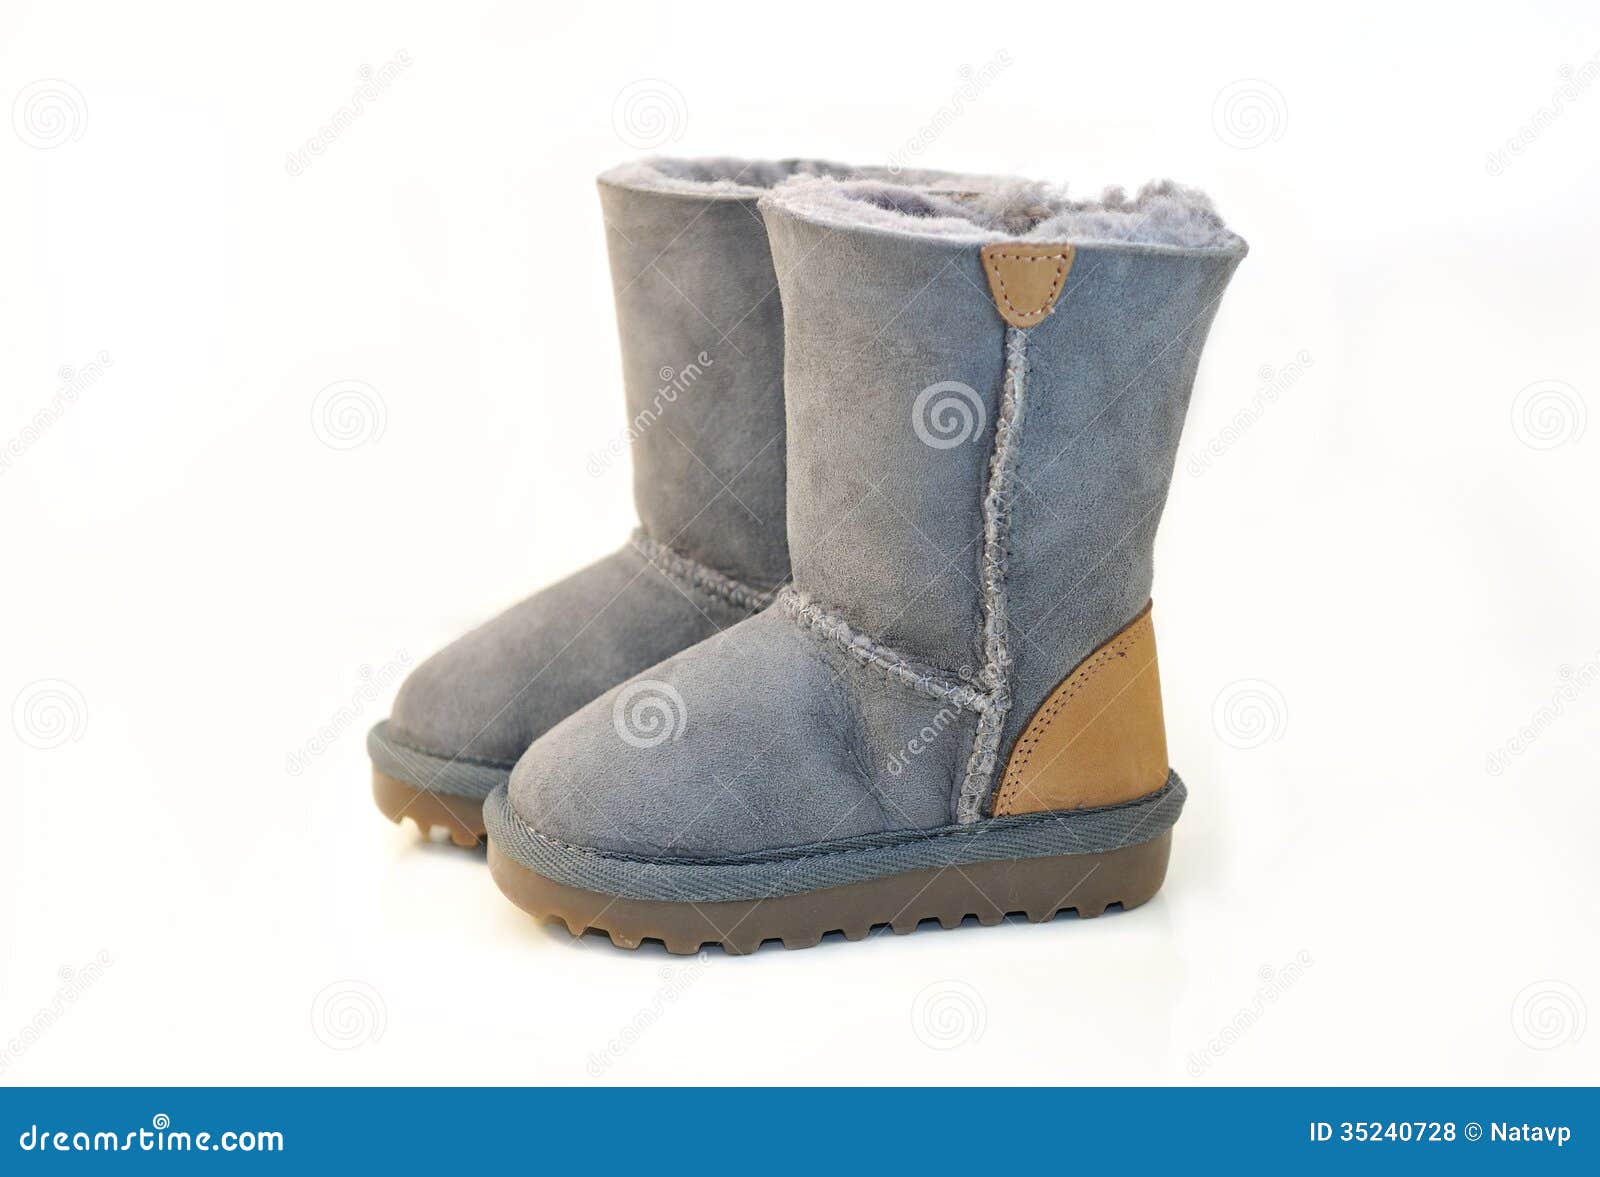 winter boots clipart - photo #16